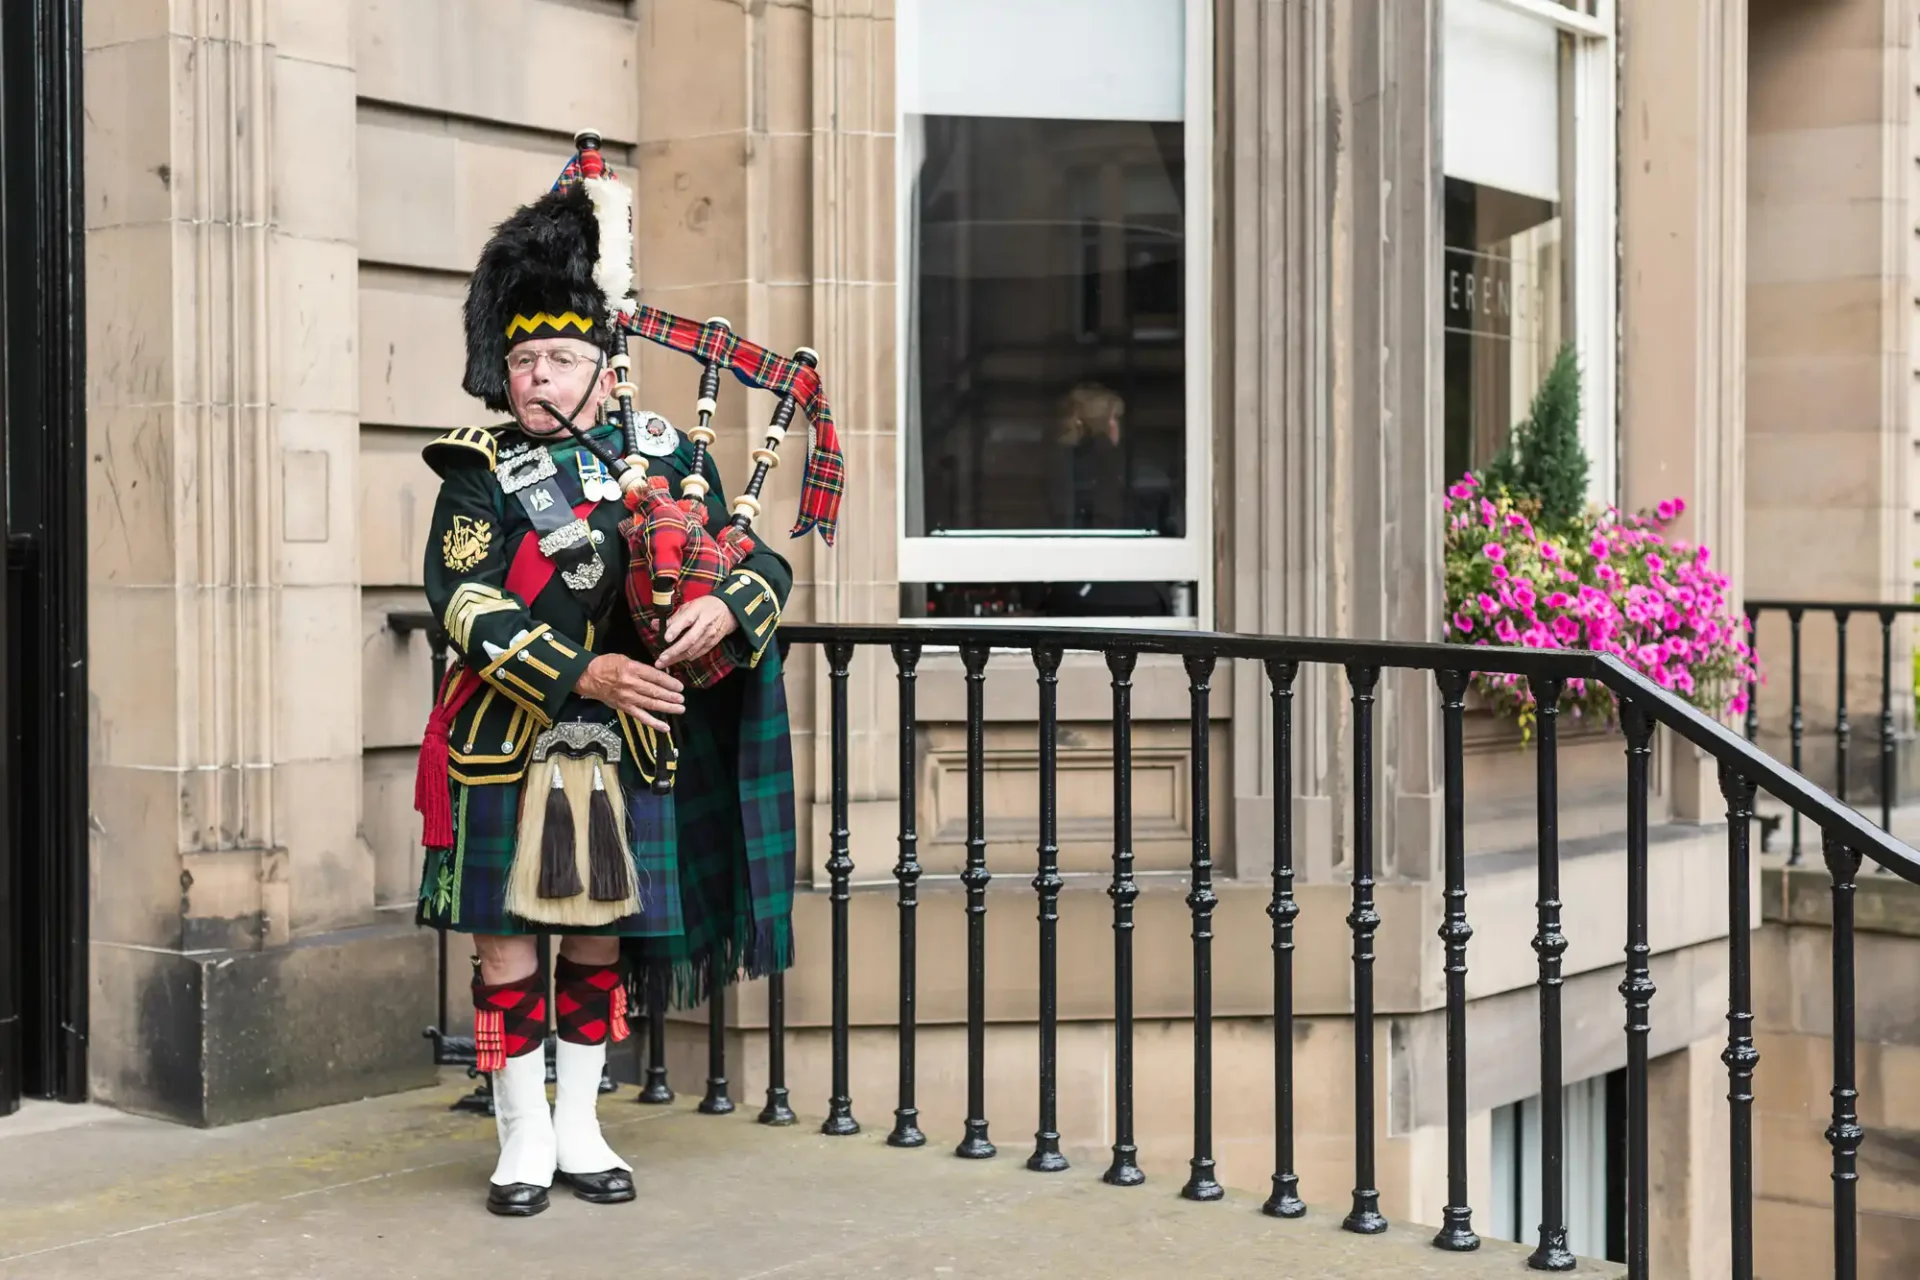 A bagpiper in traditional scottish attire playing outside a building.